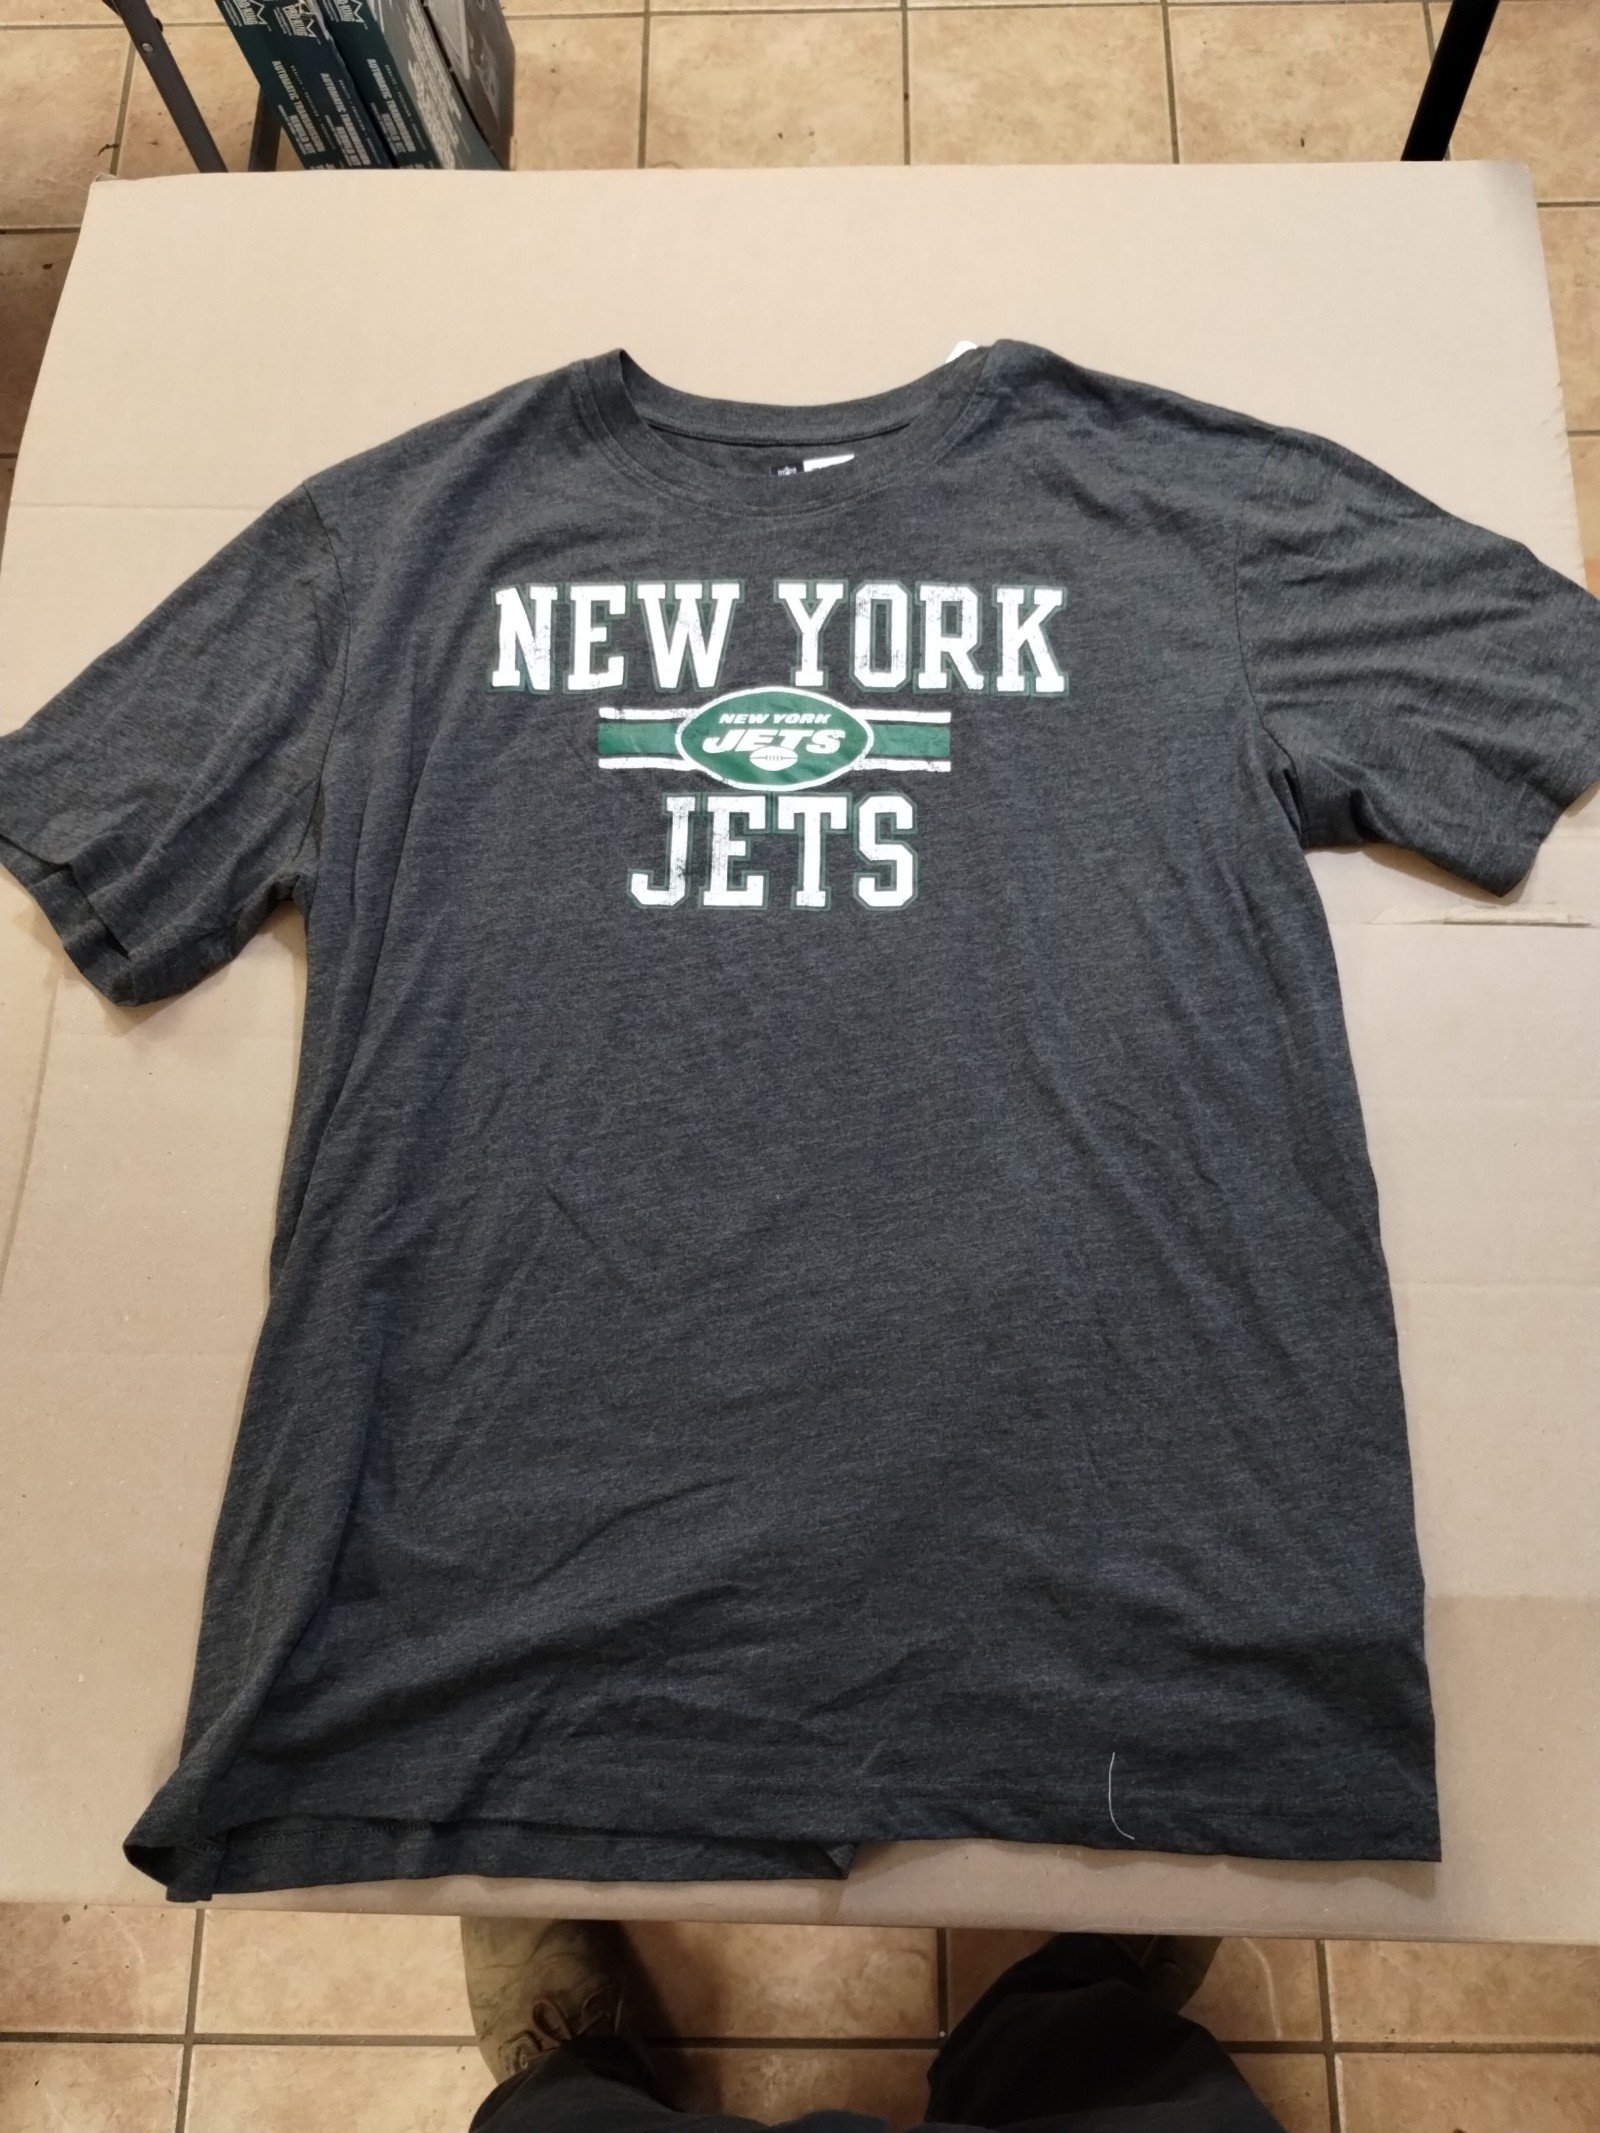 New Mens 2XL T-shirt New York Jets NFL Official F80 FuBKy2T0l